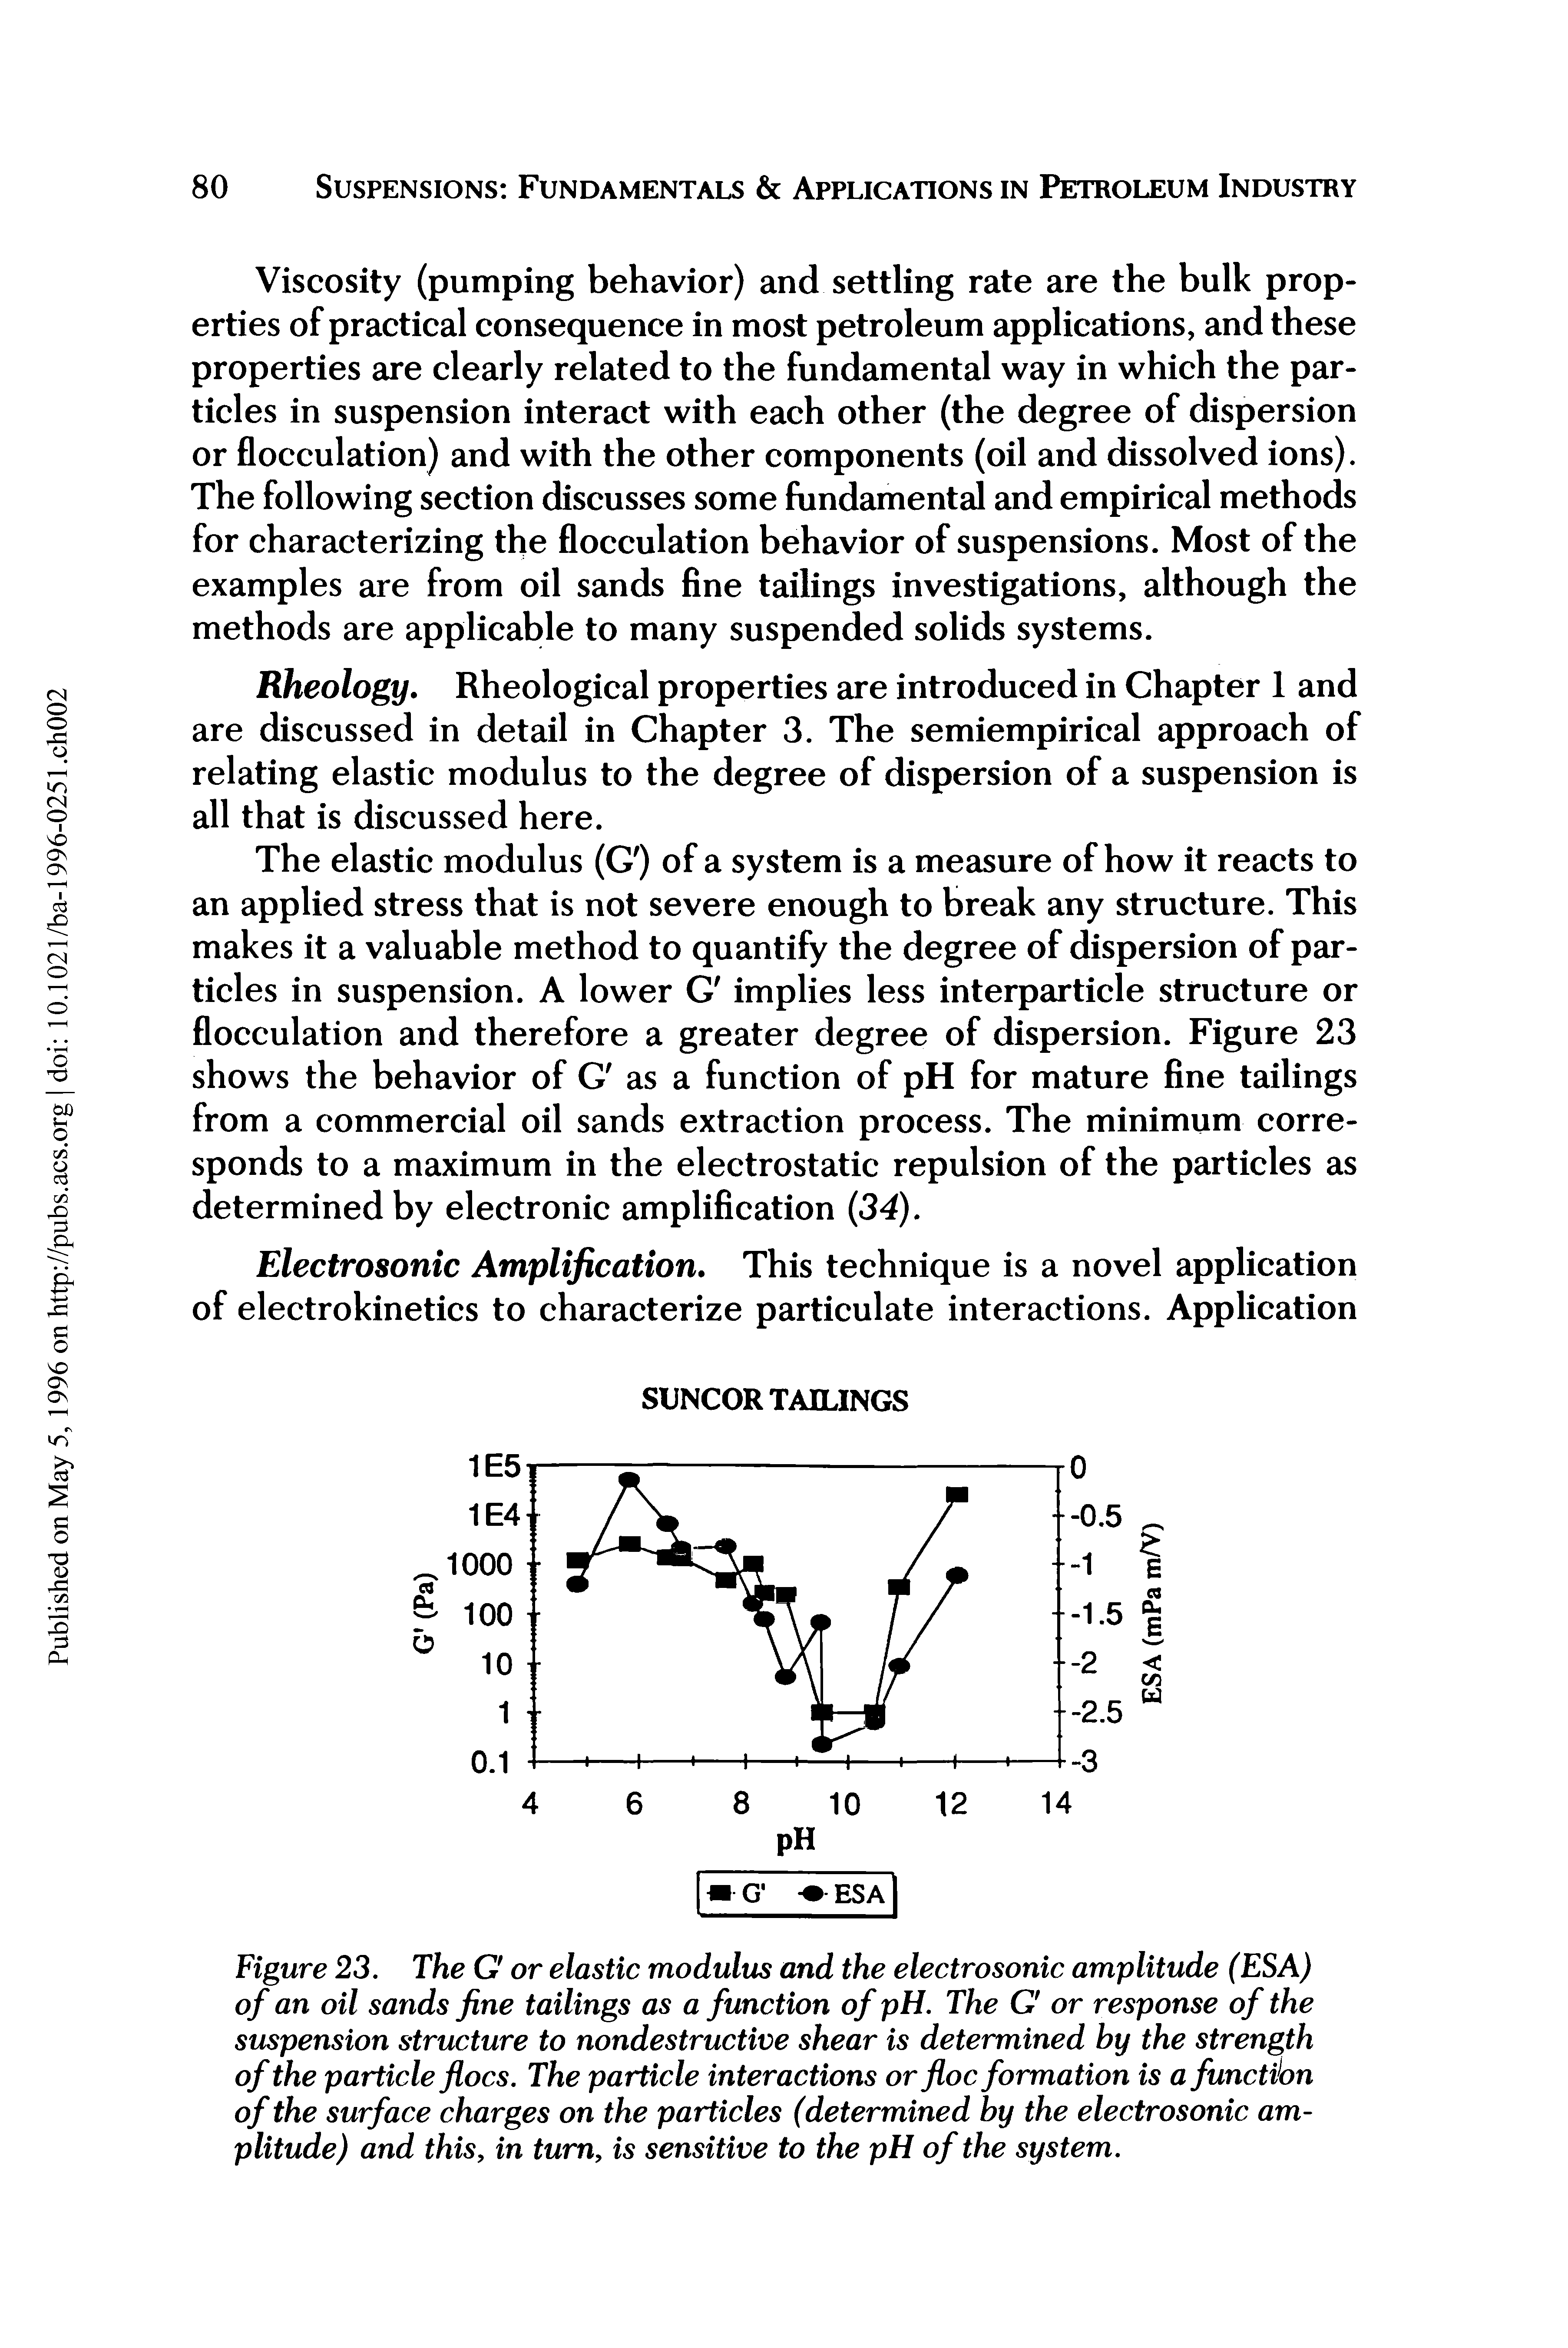 Figure 23. The G or elastic modulus and the electrosonic amplitude (ESA) of an oil sands fine tailings as a function of pH. The G or response of the suspension structure to nondestructive shear is determined by the strength of the particle floes. The particle interactions or floe formation is a function of the surface charges on the particles (determined by the electrosonic amplitude) and this, in turn, is sensitive to the pH of the system.